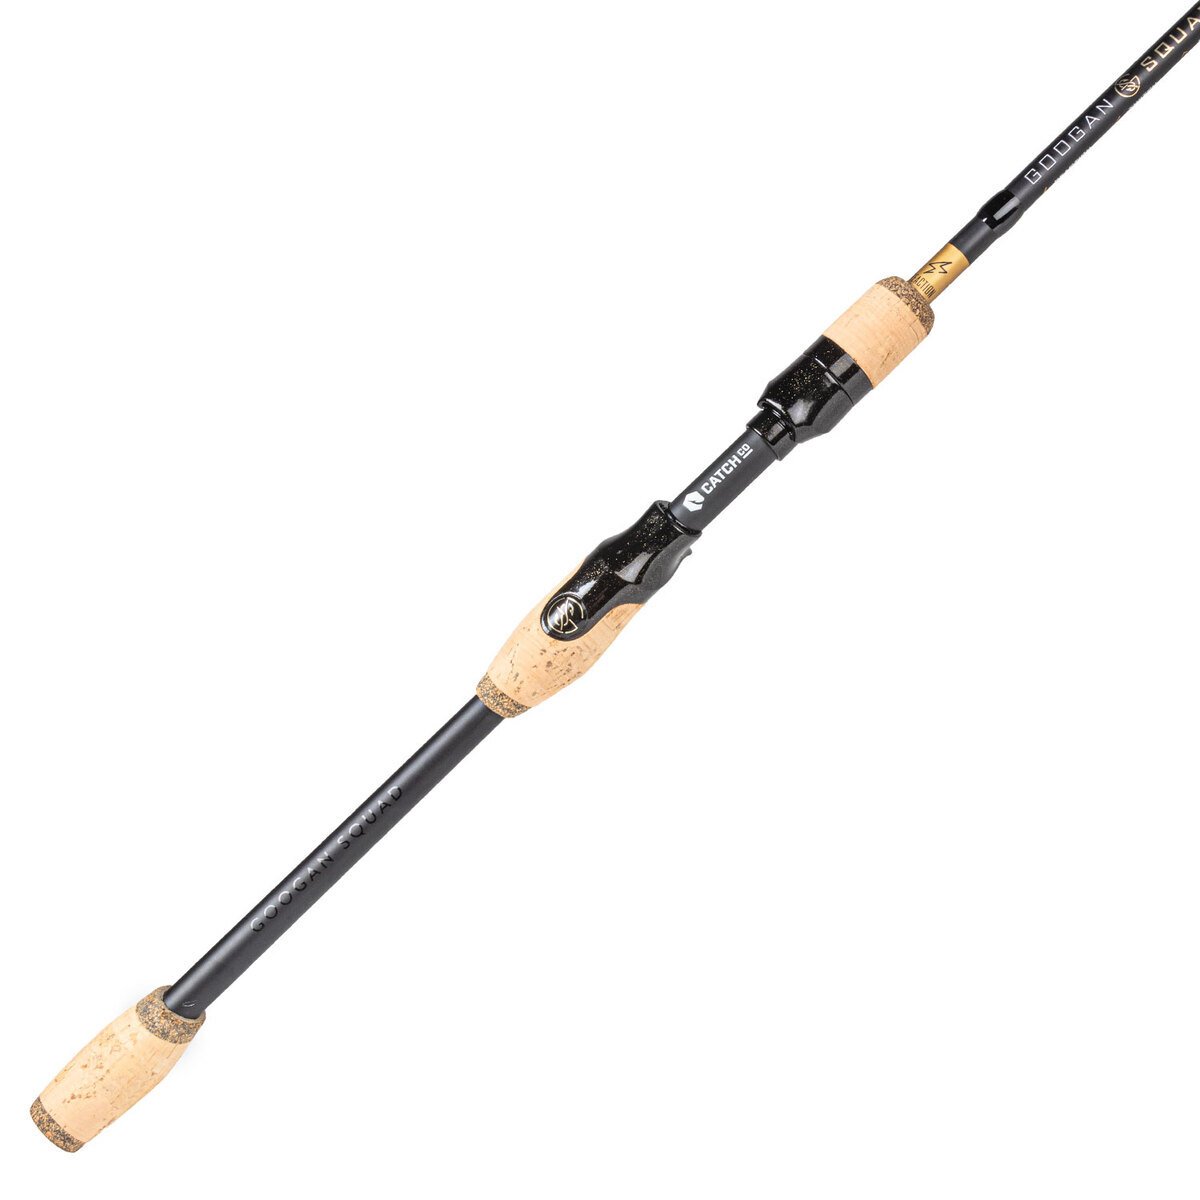 New Micro Series Rods from Googan Squad and Catch Co. Launch to